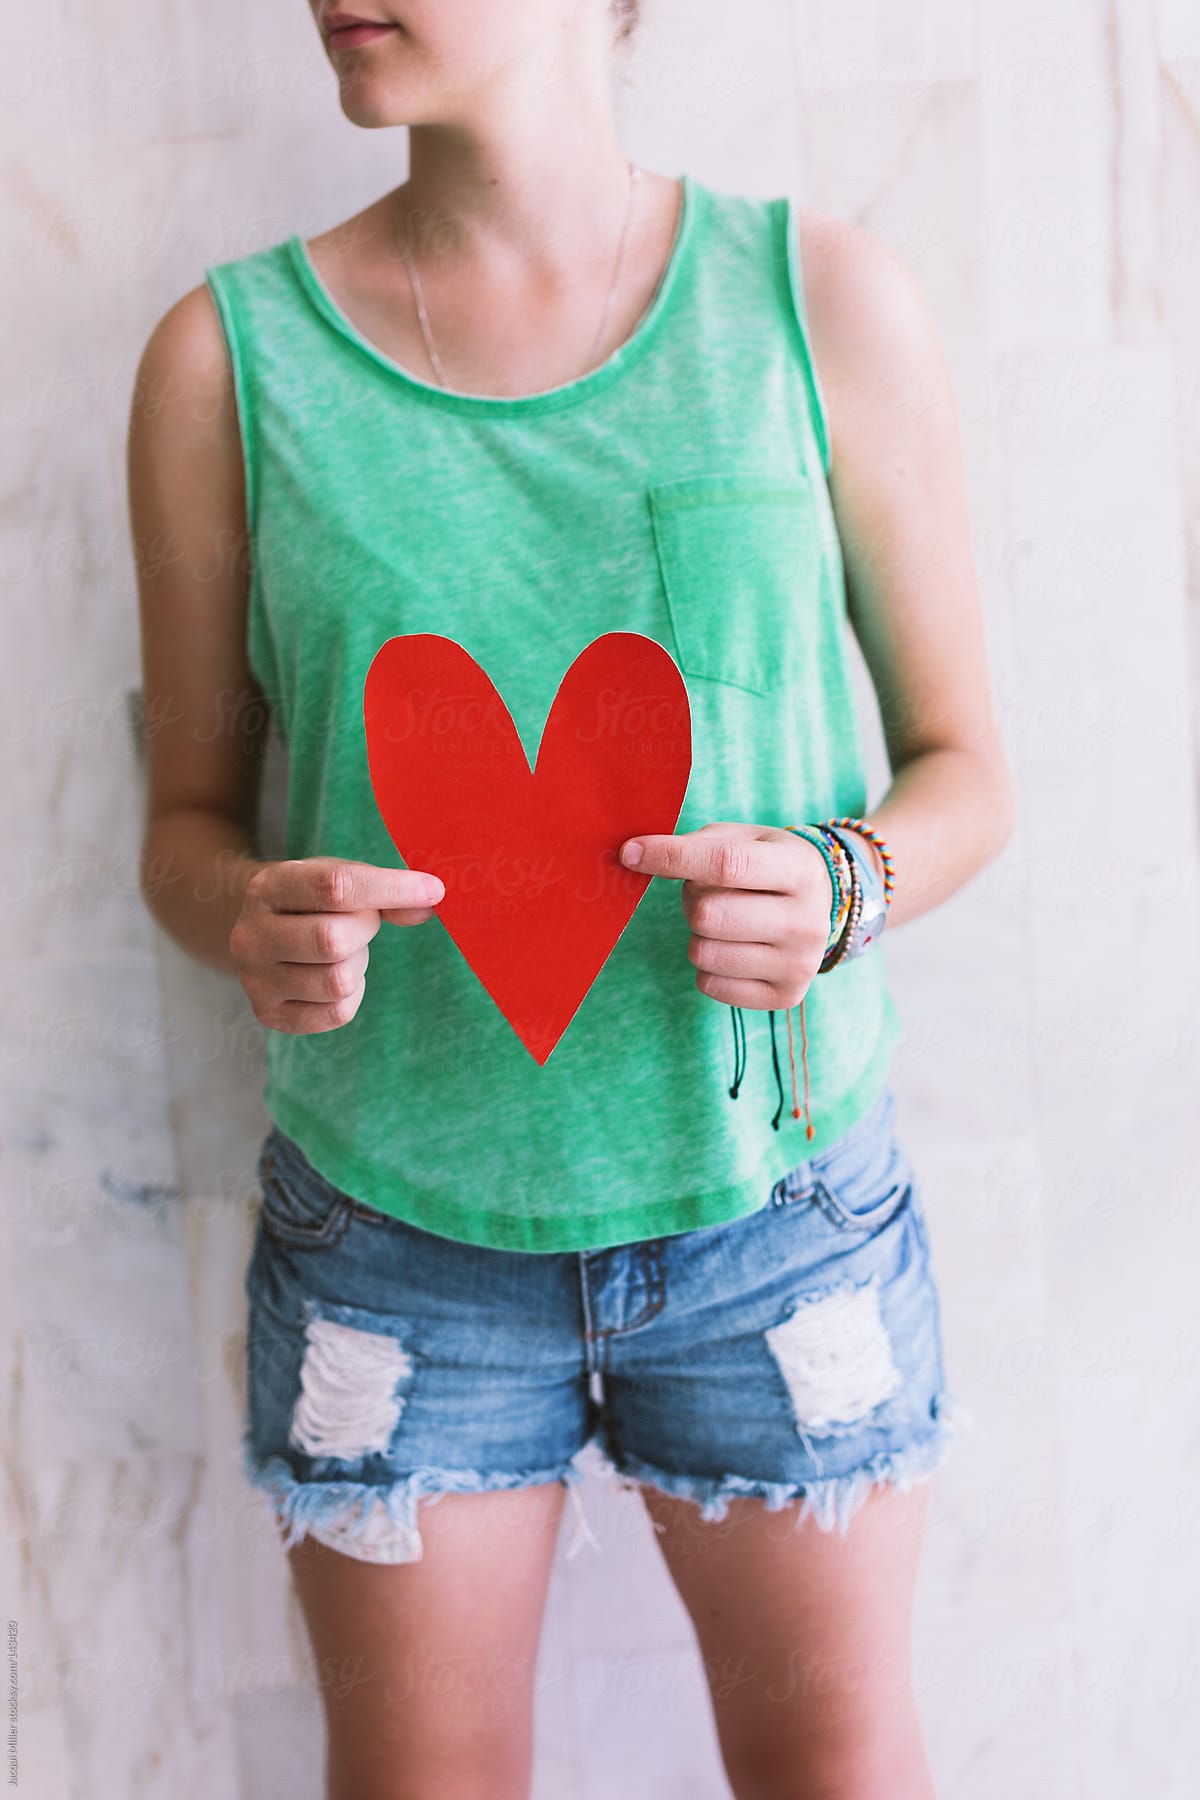 Teen girl holds a red paper heart in front of her body